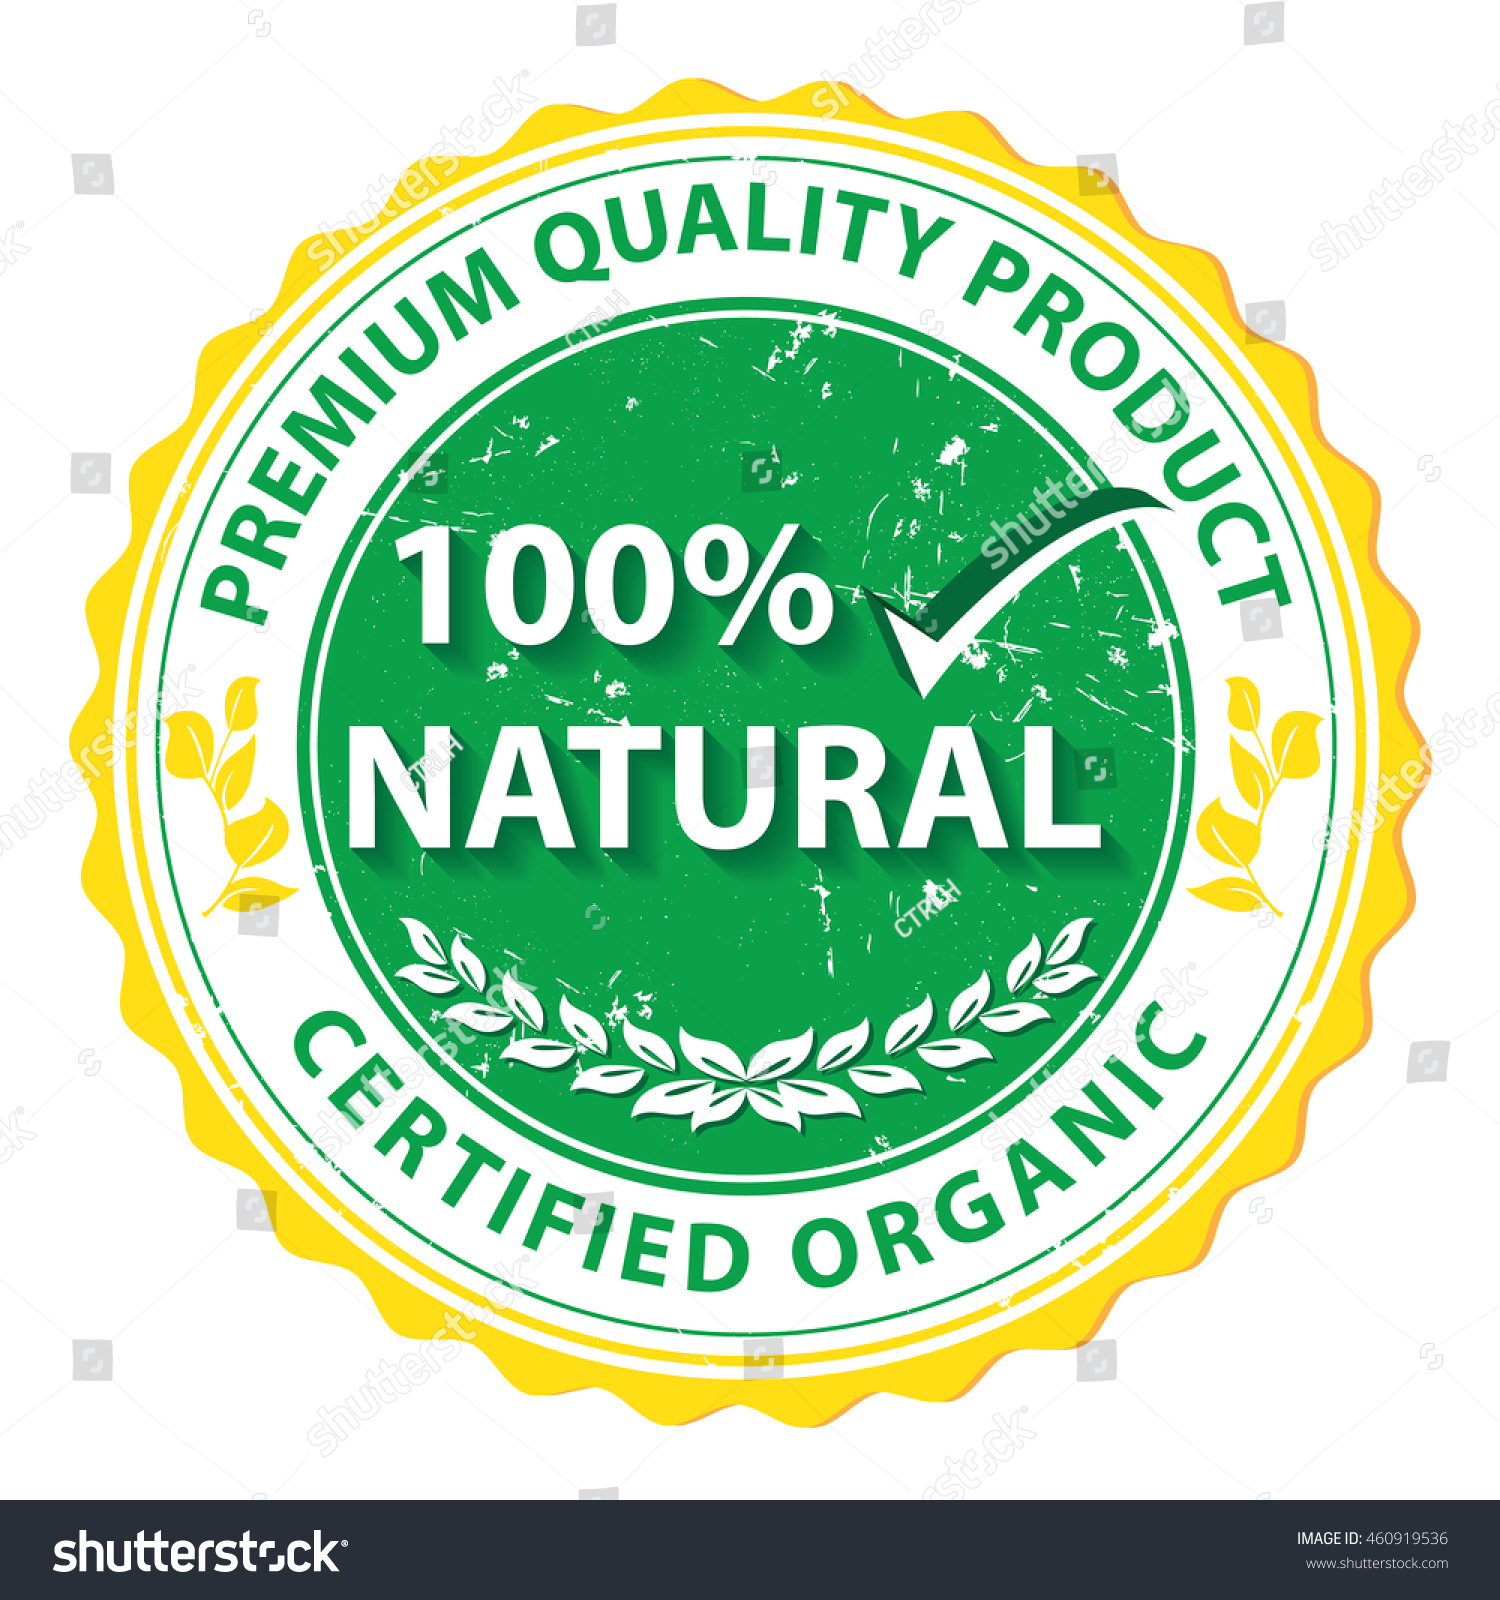 Certified Organic 100 Natural Premium Quality Stock Vector (2018 ...